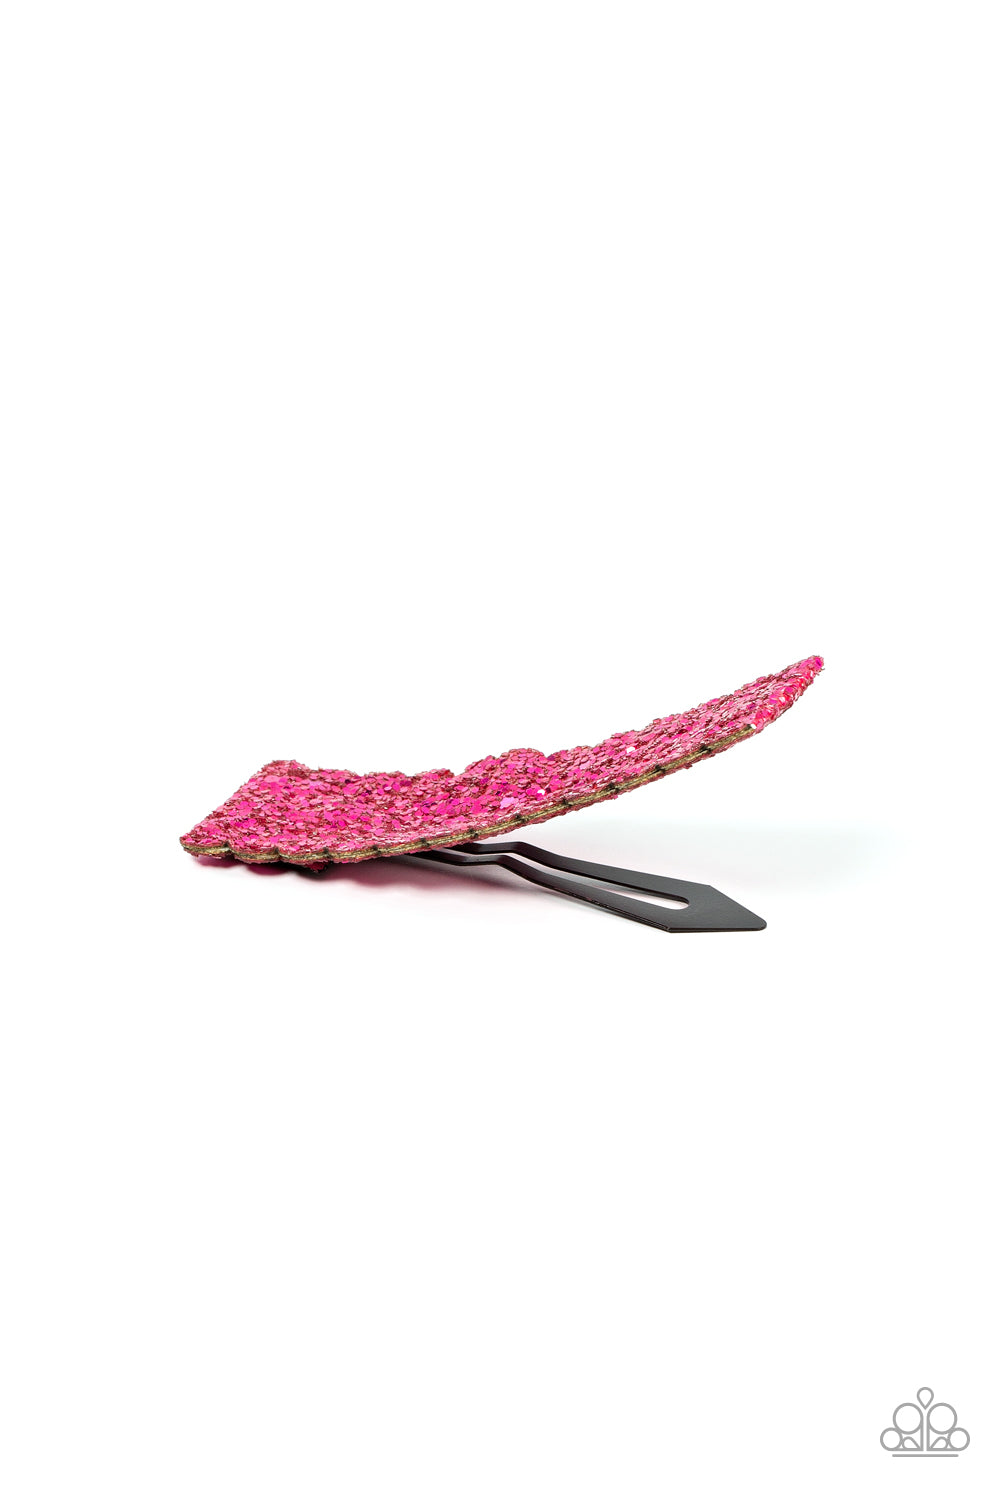 Shimmery Sequinista - Pink